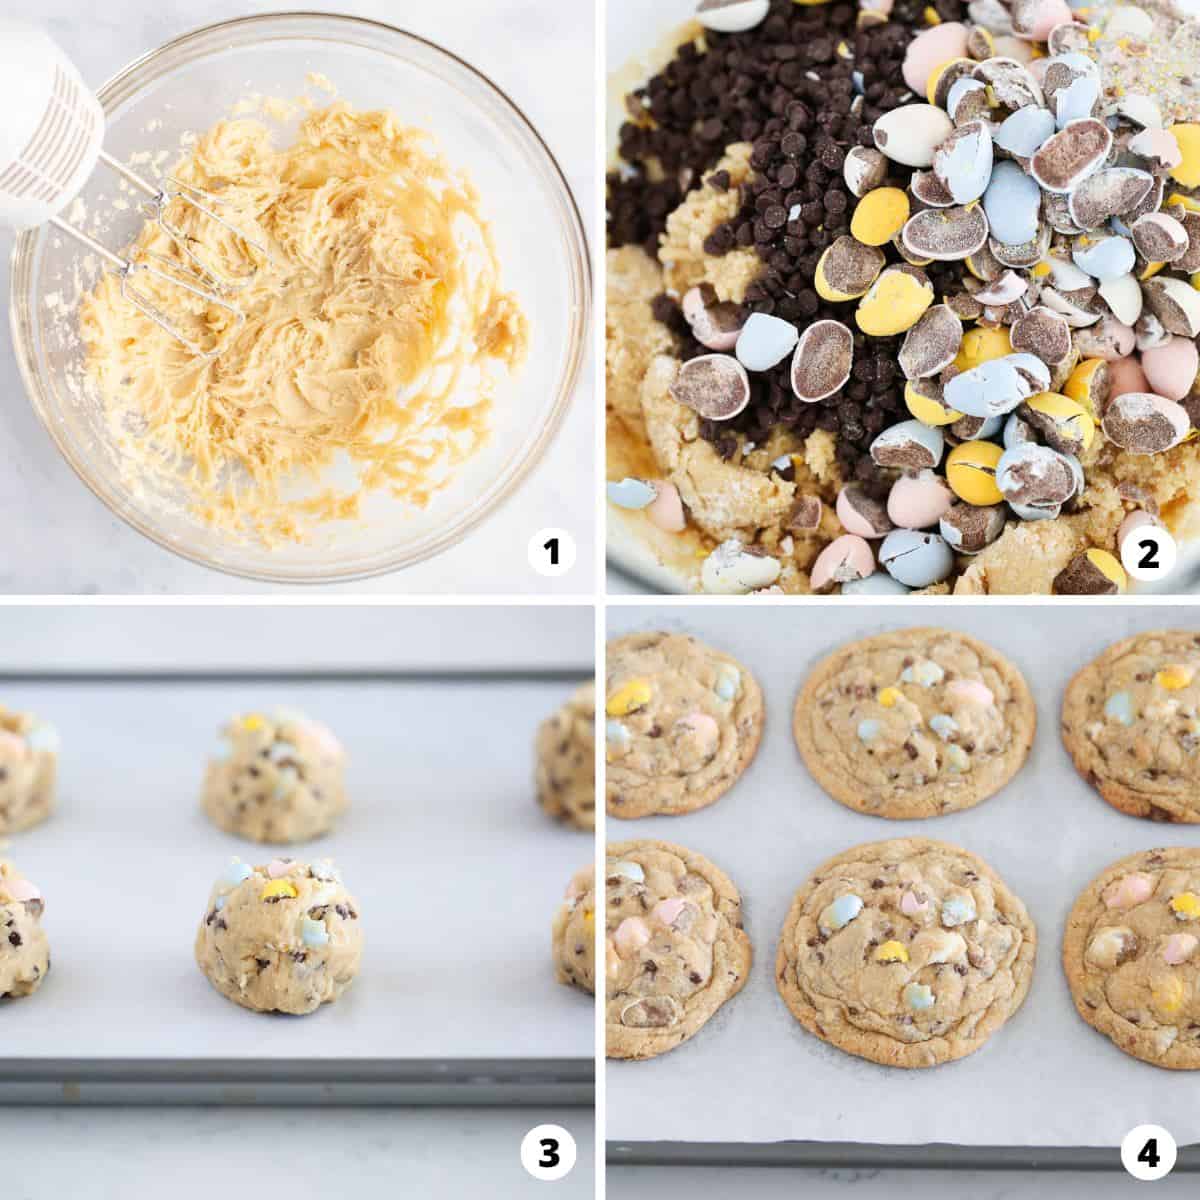 Showing how to make cadbury egg cookies in a 4 step collage. 